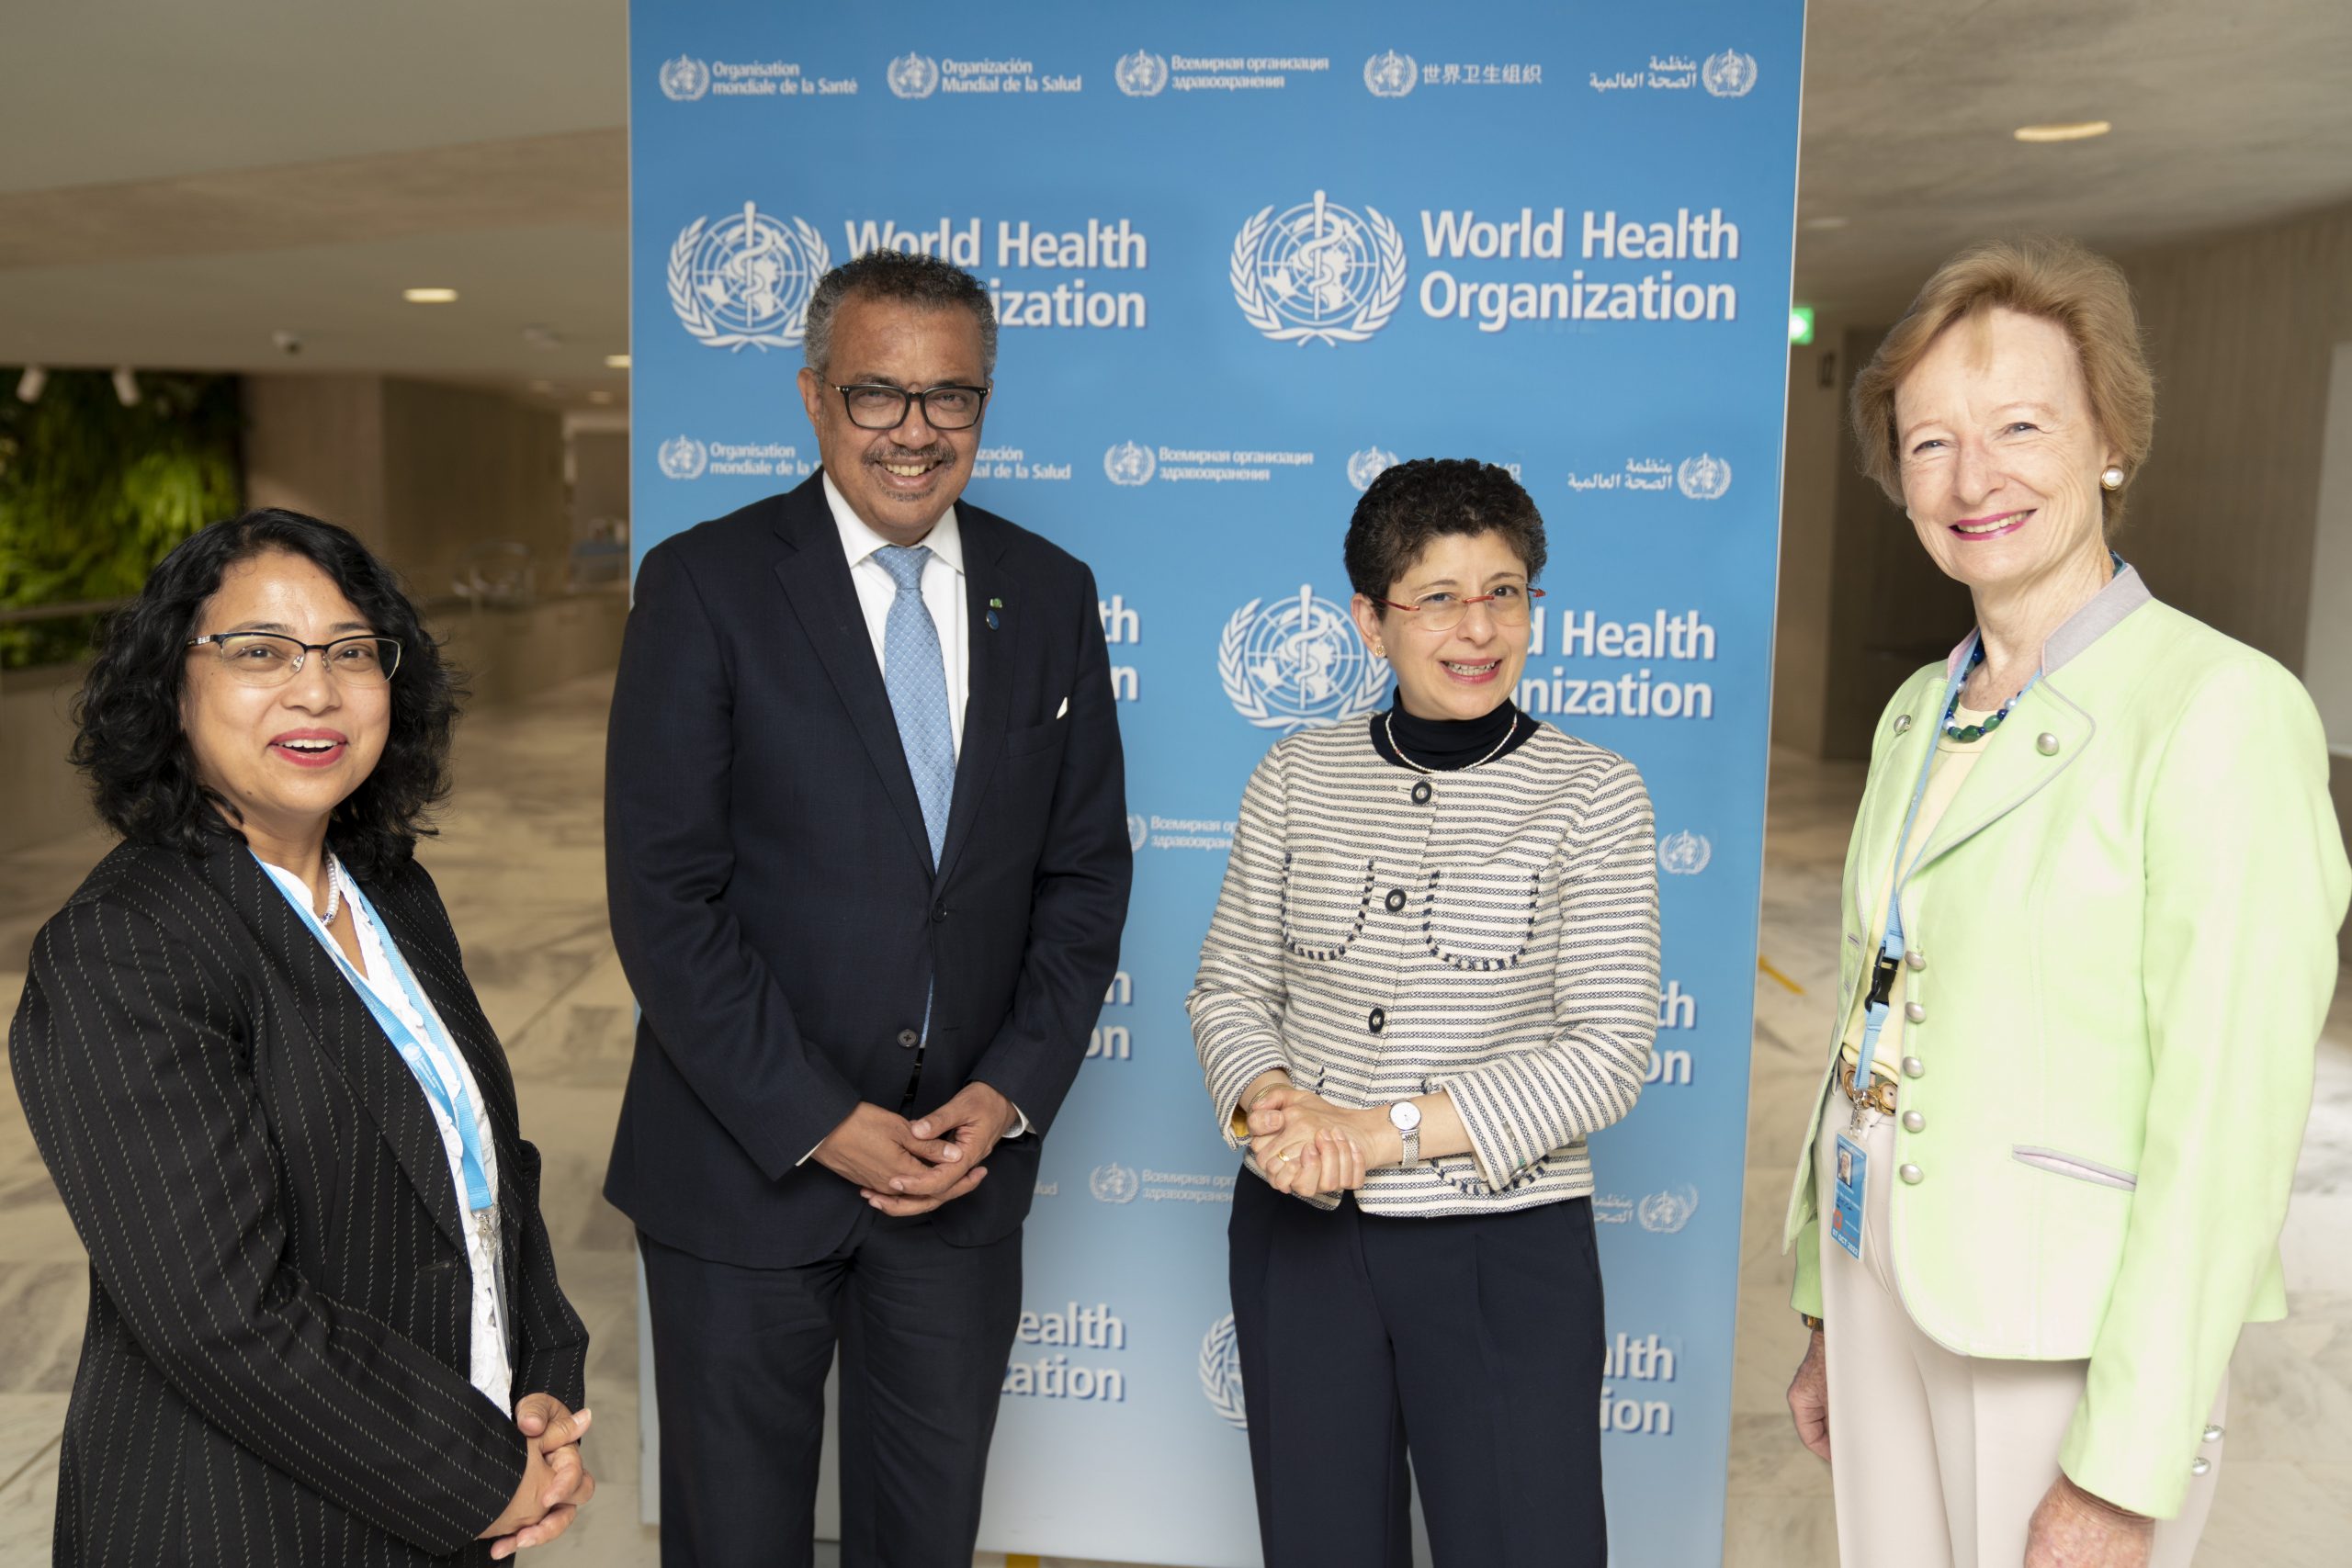 Signing of MOU between the World Health Organization (WHO) and Religions for Peace (RfP) at WHO Headquarters in Geneva on 08.06.2022